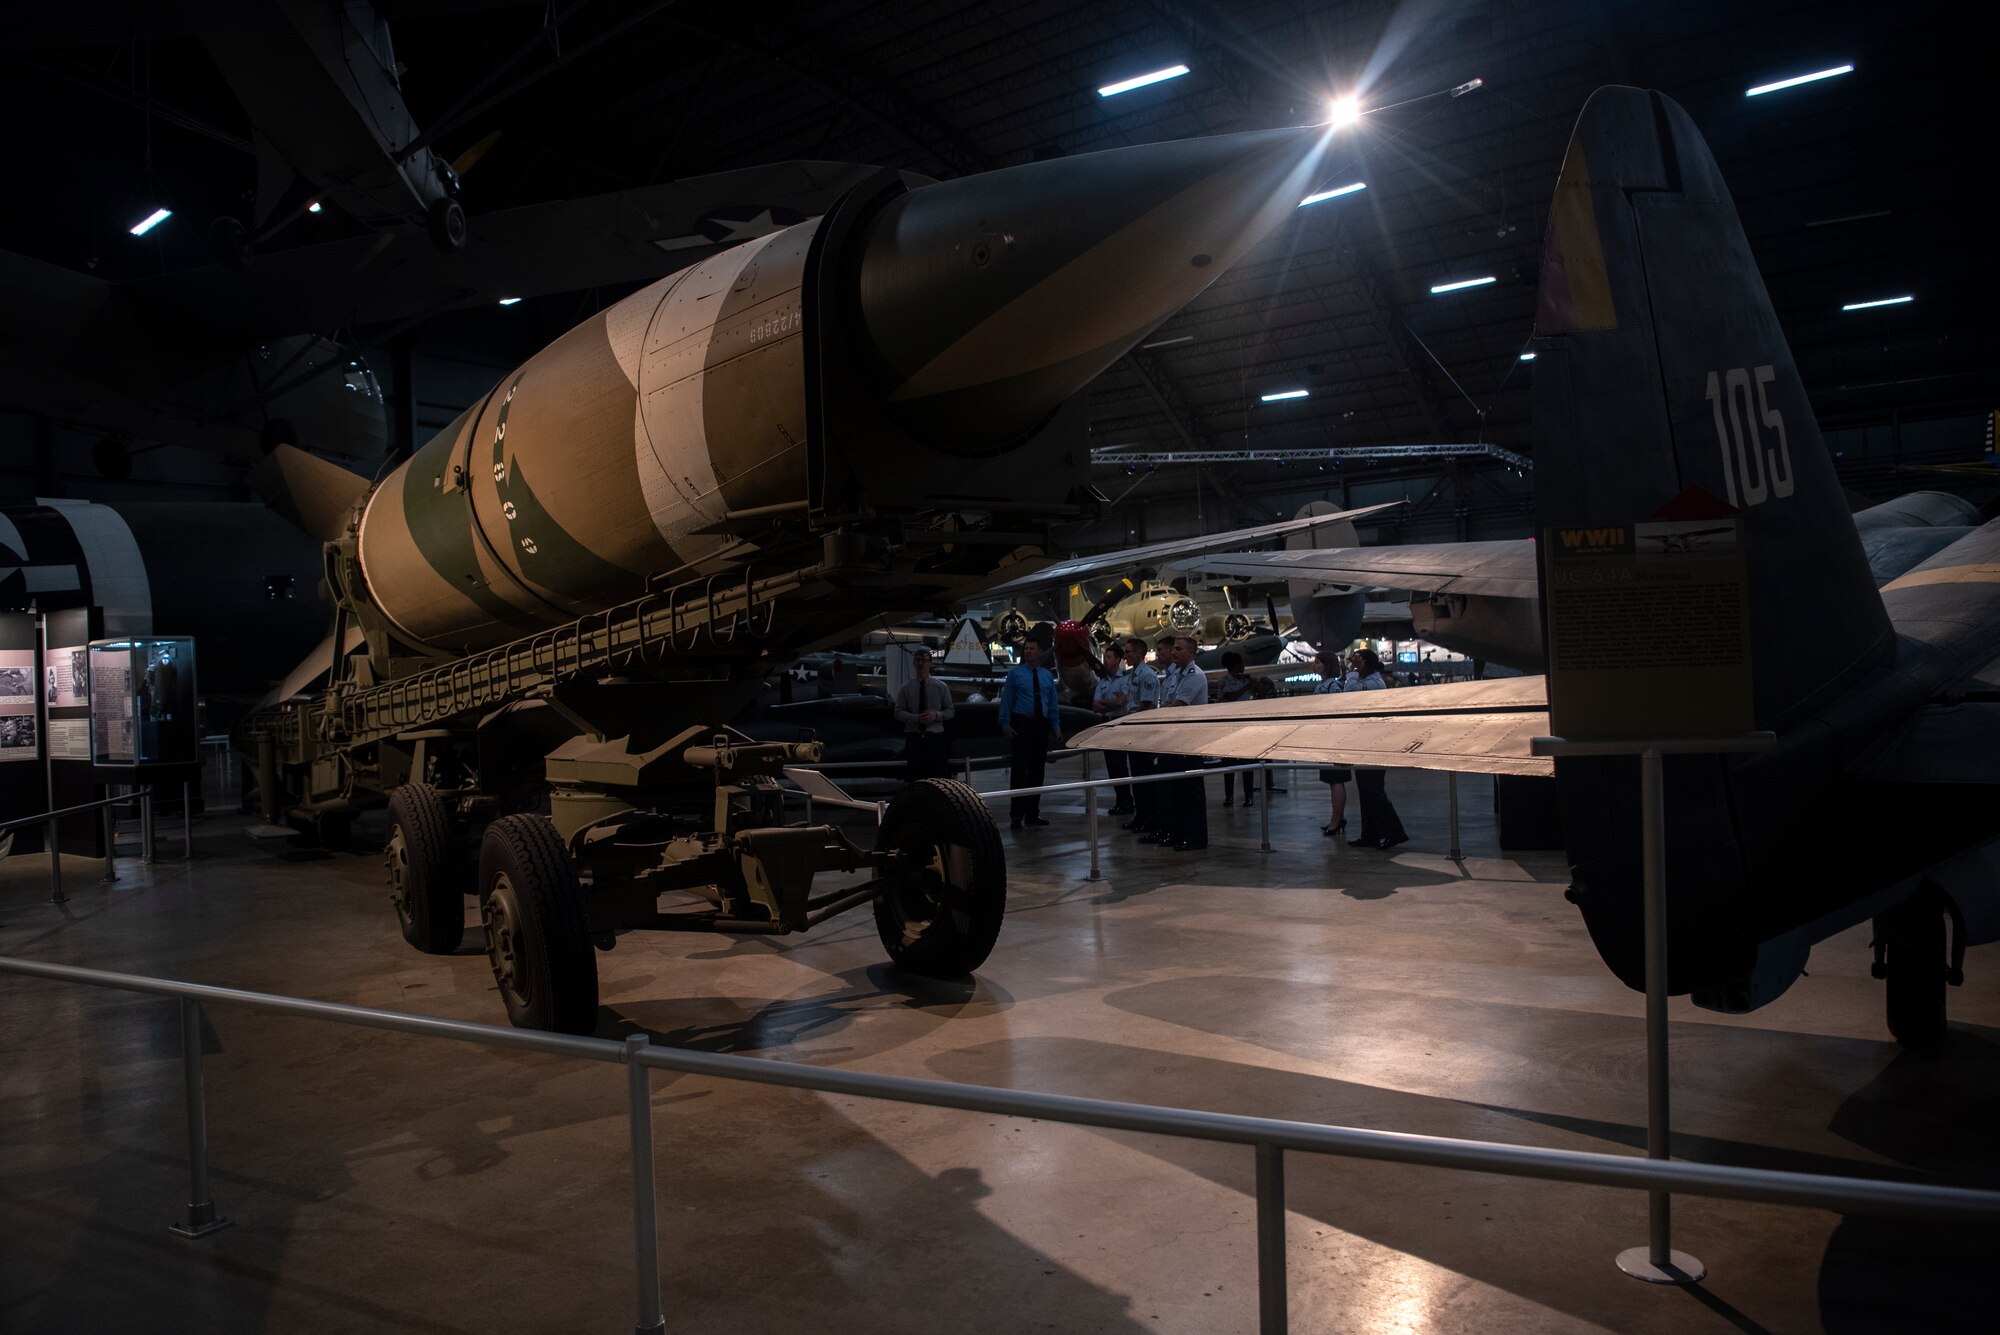 The V-2 rocket sits on display at The National Museum of the U.S. Air Force Sept. 4, 2019, at Wright-Patterson Air Force Base, Ohio. The rocket was the worlds first long range guided ballistic missile, making it the precursor to the ICBM mission and the Minuteman III. (U.S. Air Force photo by Senior Airman Abbigayle Williams)